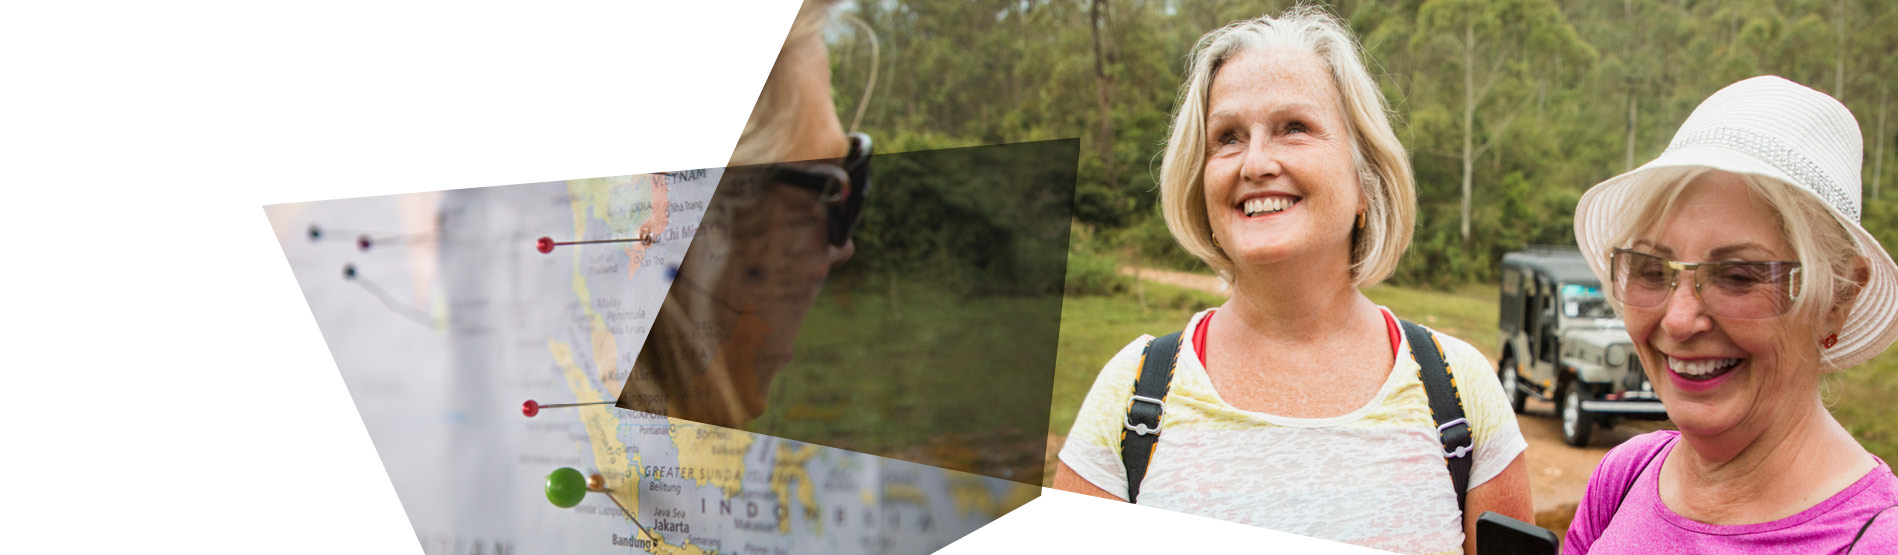 The banner contains two images: The image on the right is of a partially sighted woman The image on the left is of a map with pins in different locations